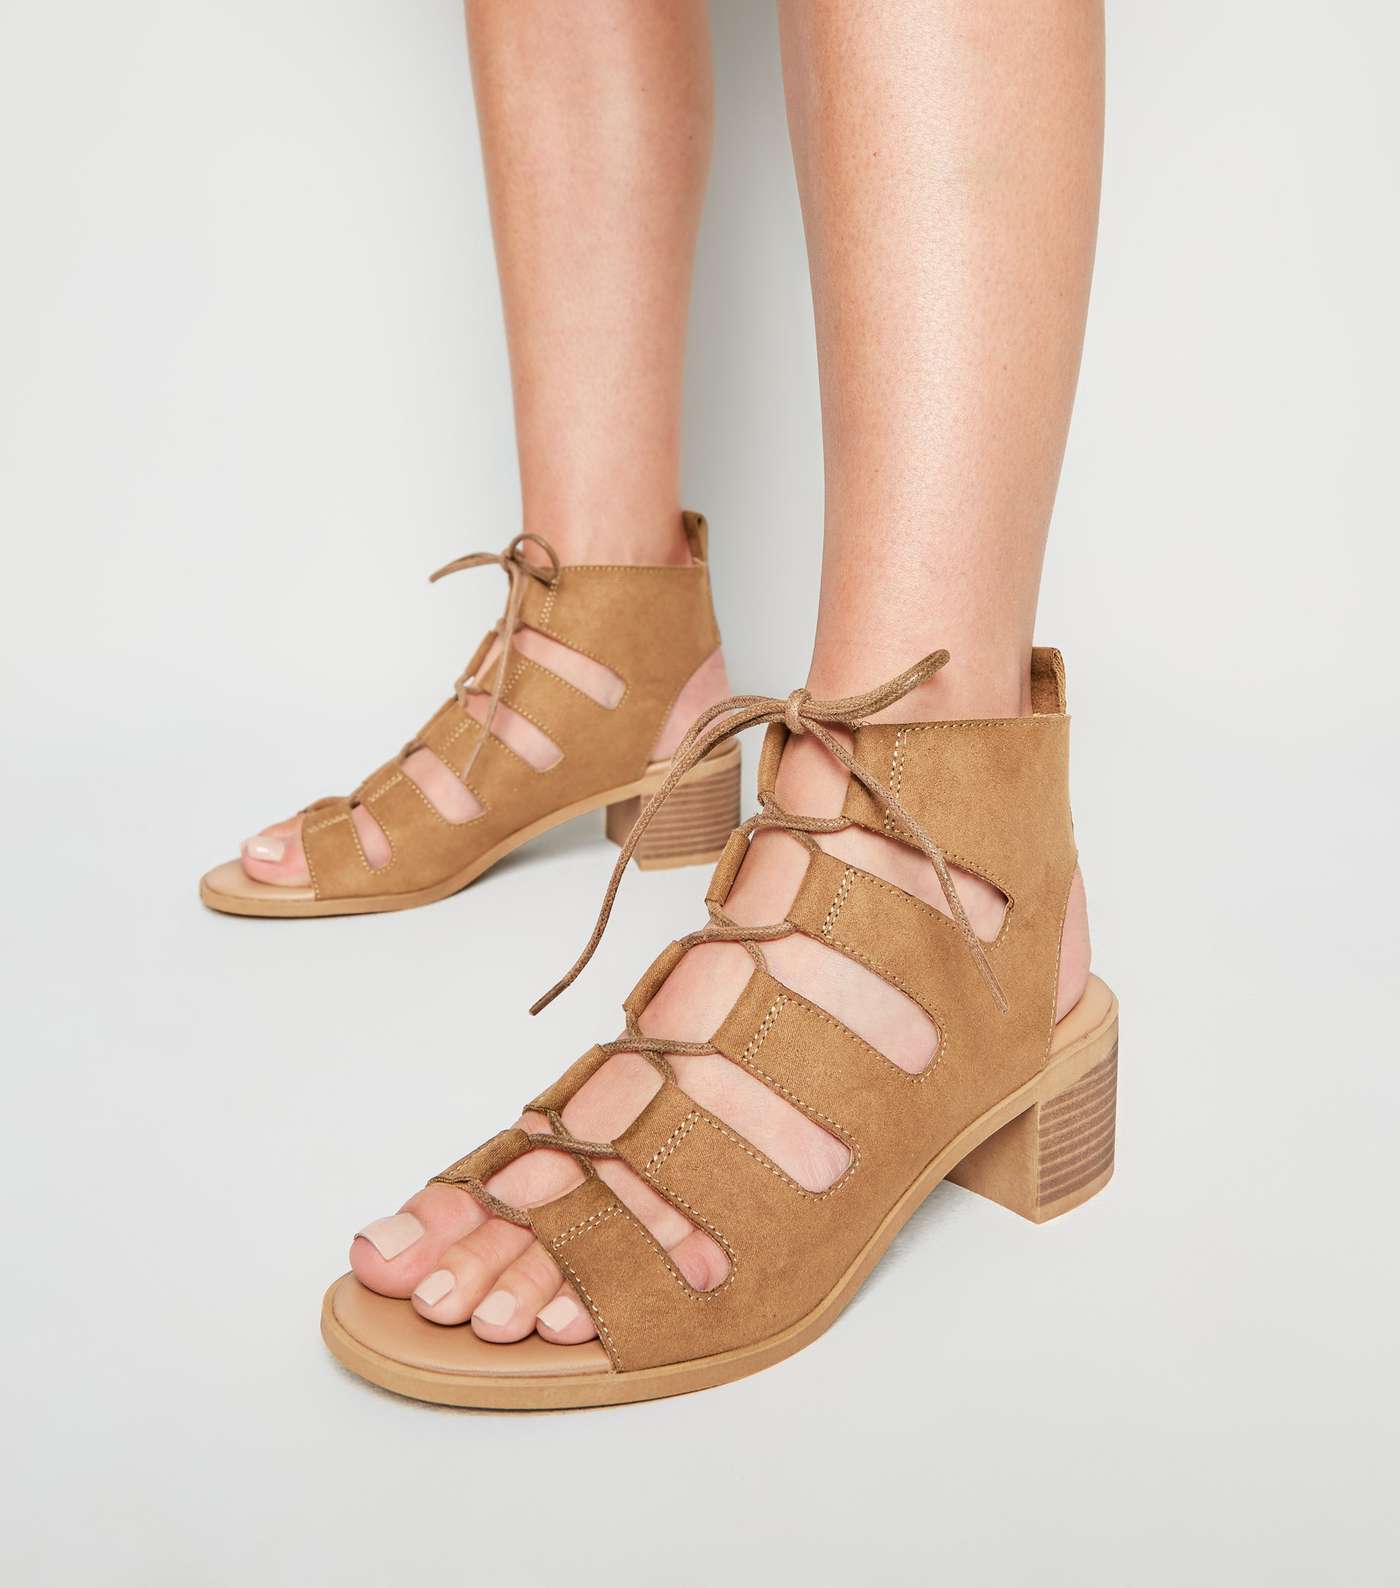 Tan Ghillie Lace Up Low Heel Sandals Image 2